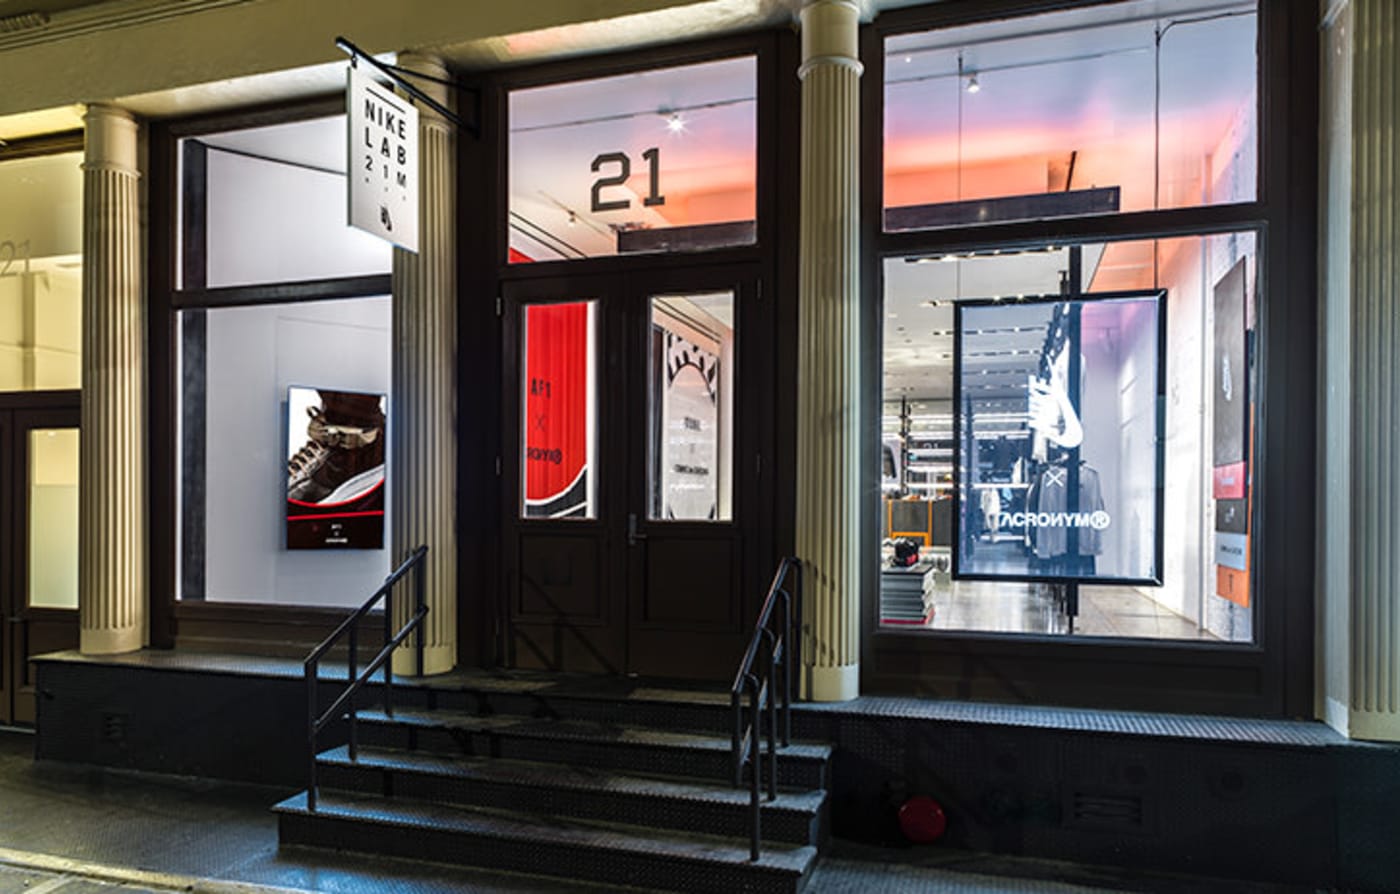 NikeLab 21 Mercer in New City Closing in 2023 After 15 Years Complex